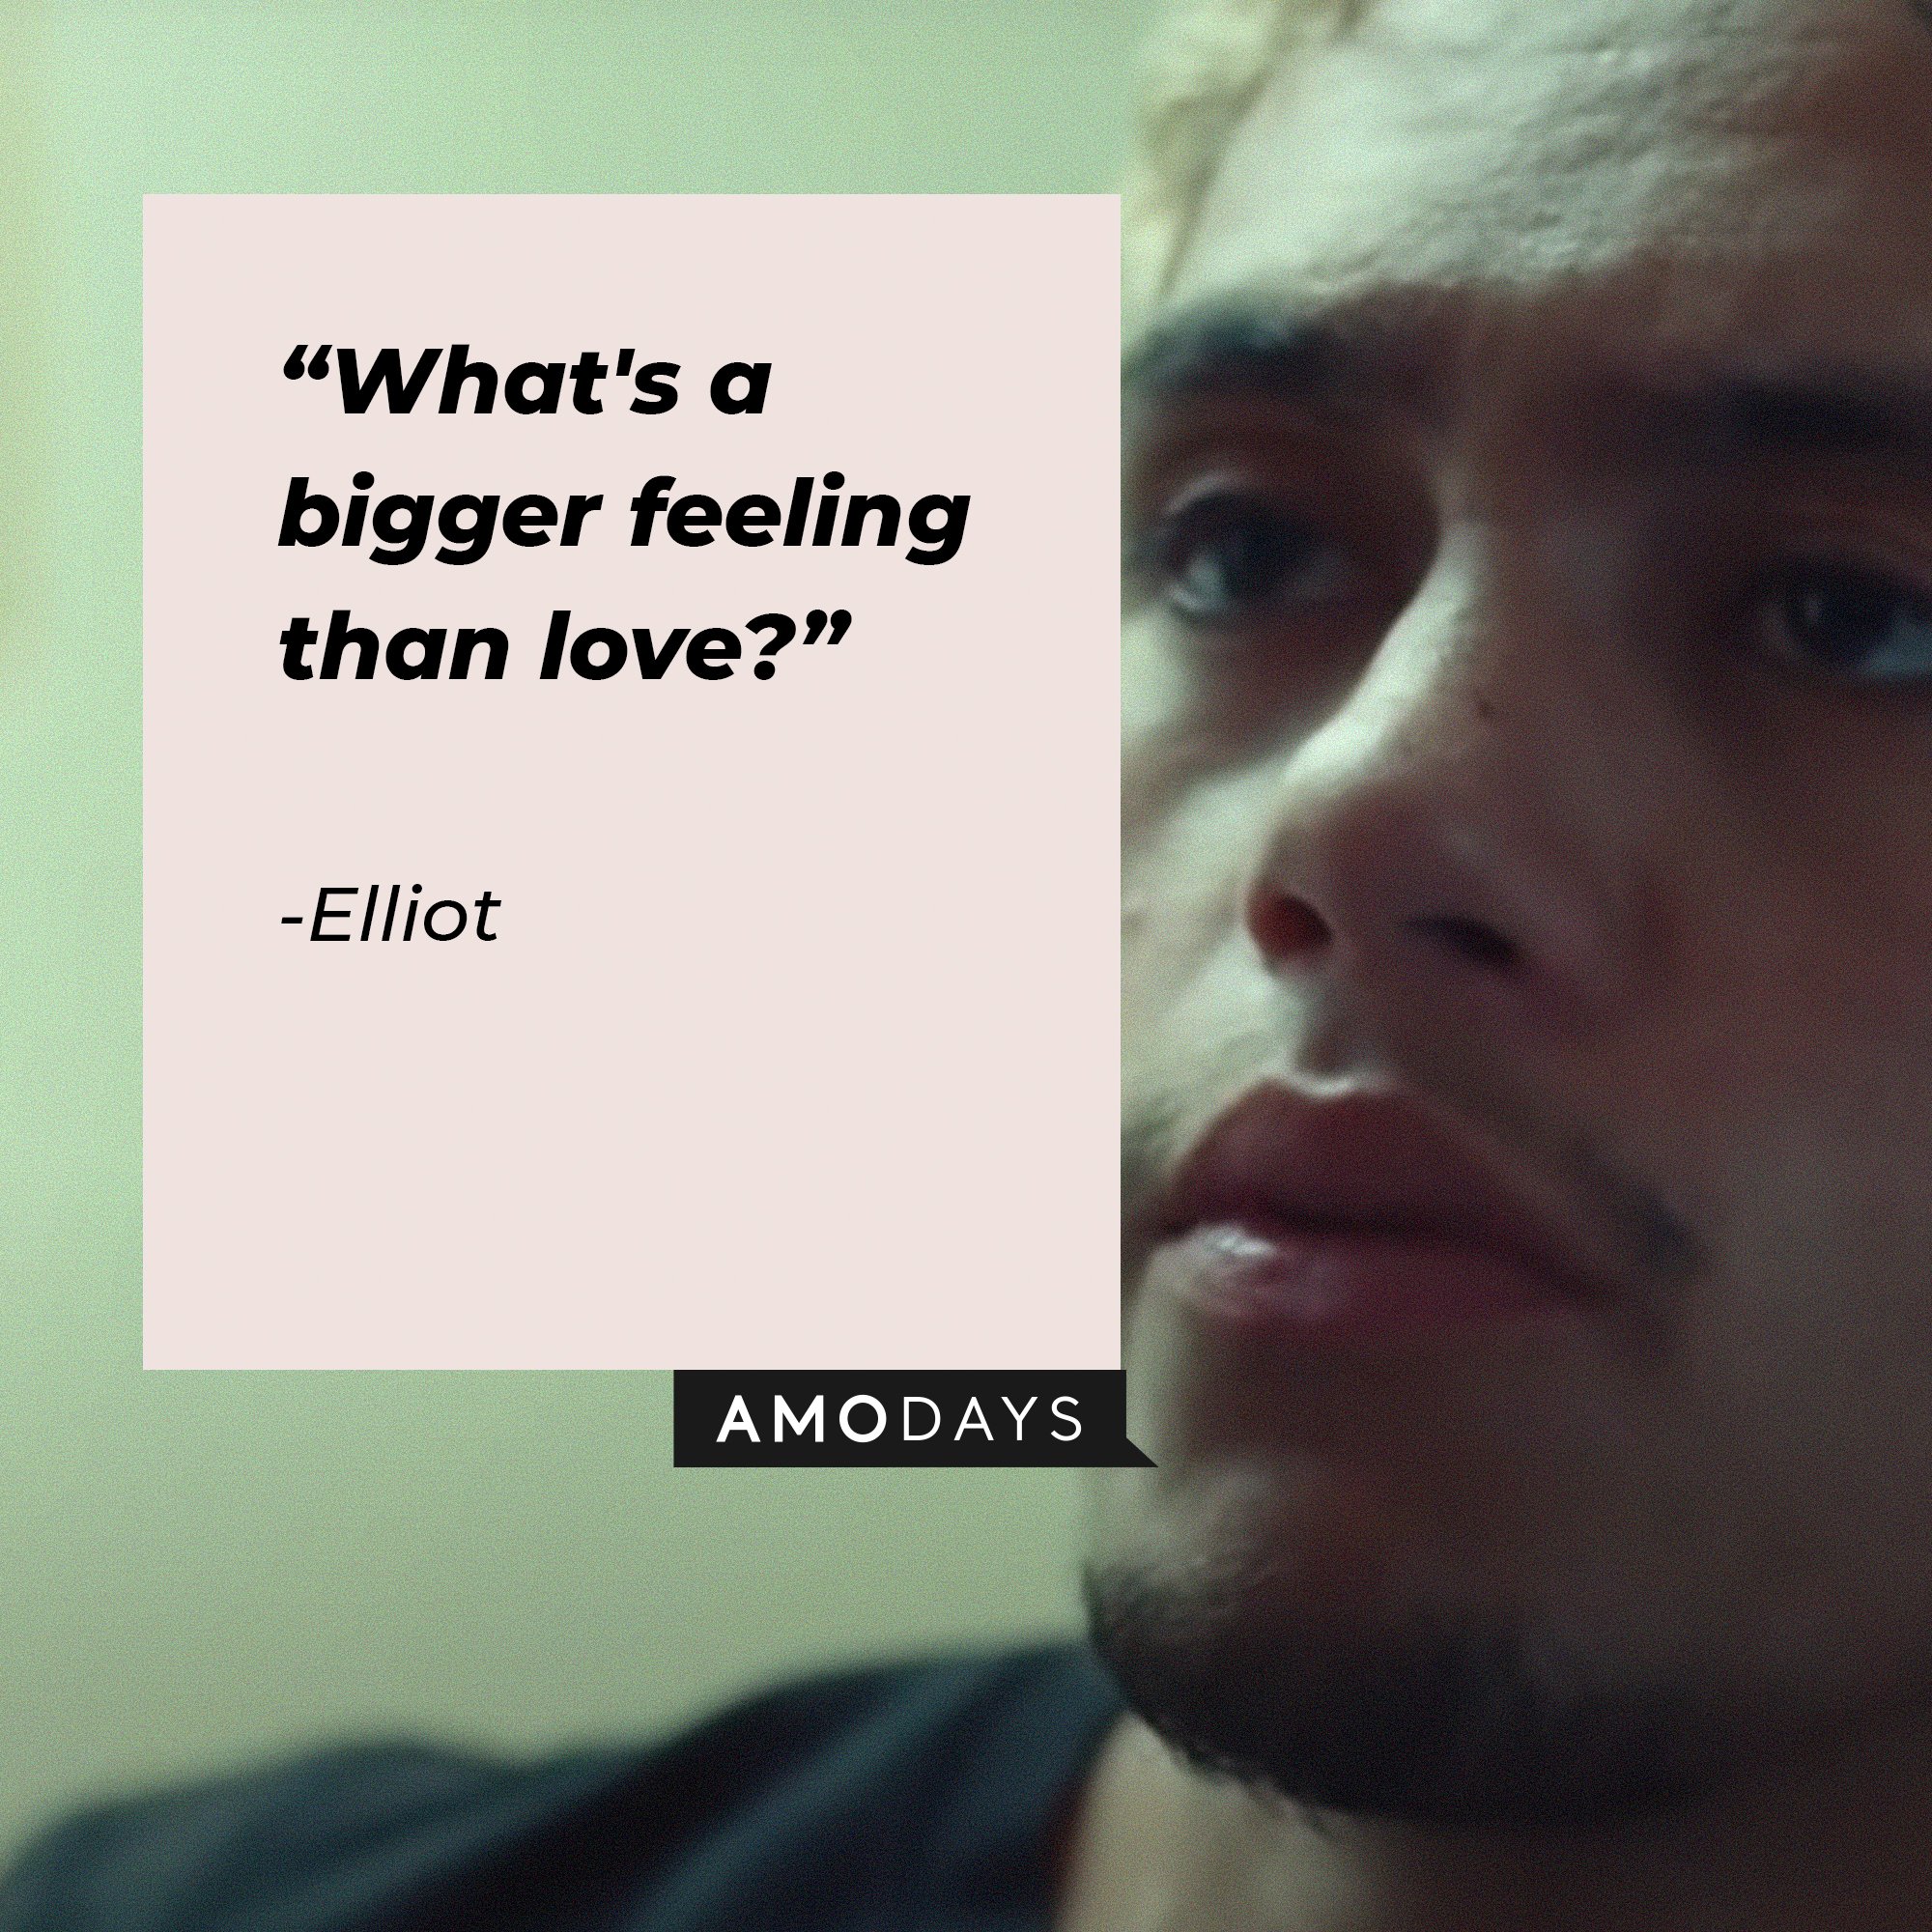 Elliot’s quote: "What's a bigger feeling than love?" | Image: AmoDays